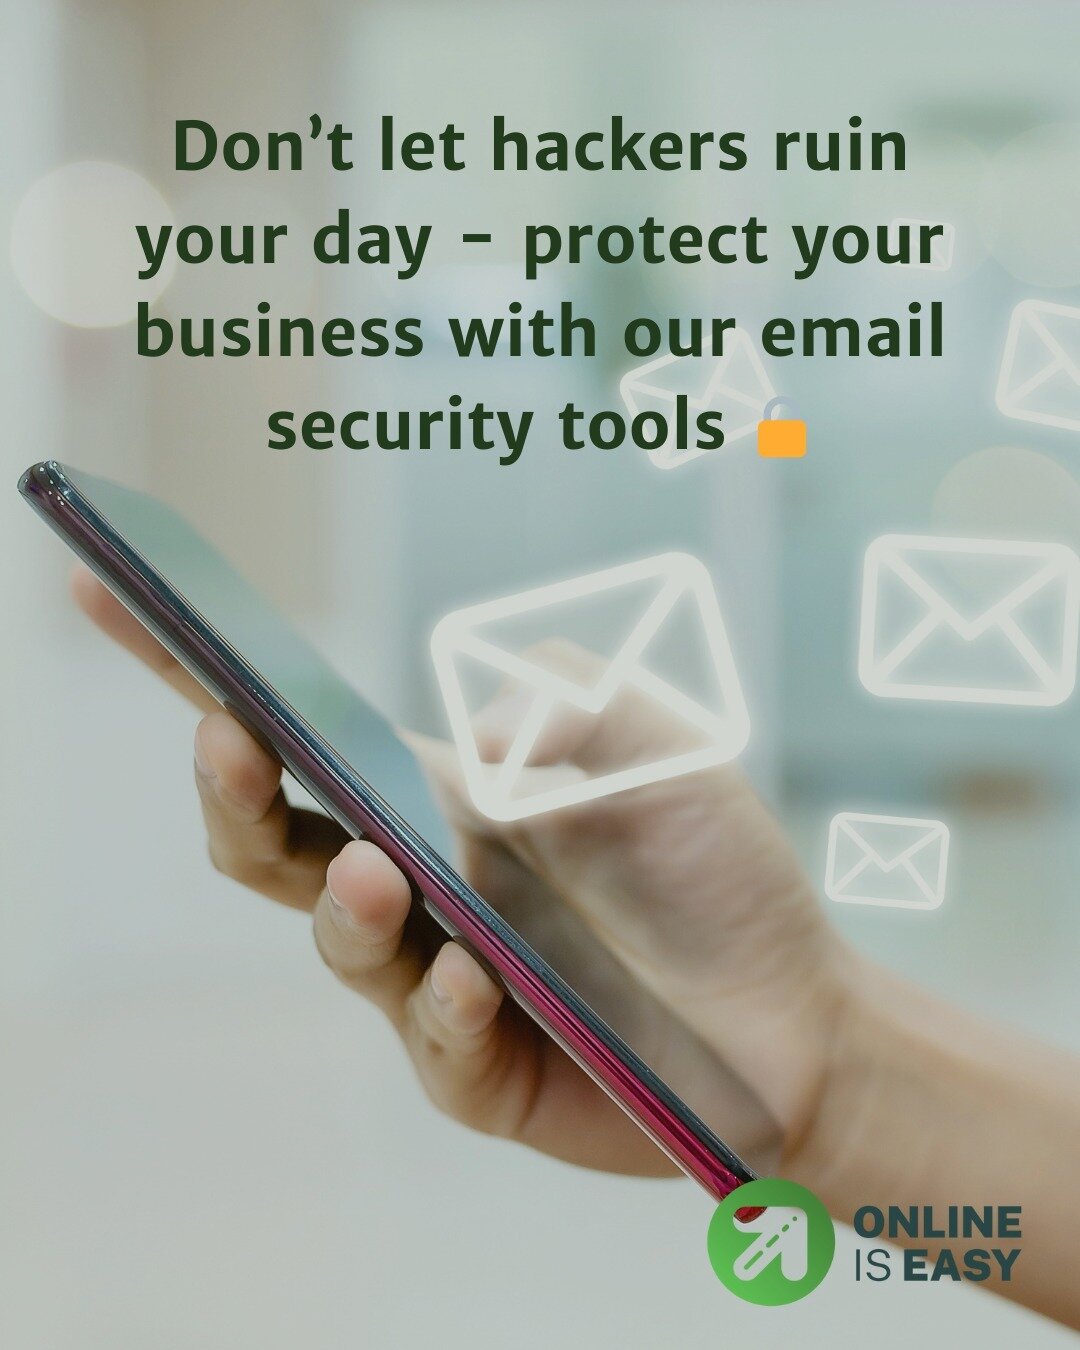 Say no to email hijackers and cyber sneak attacks⁠
⁠
We know security isn&rsquo;t exactly sexy, but neither is a scam&hellip; ⁠
⁠
In today's digital landscape, protecting your business from scams, fraud, and theft is non-negotiable. ⁠
⁠
That's why to